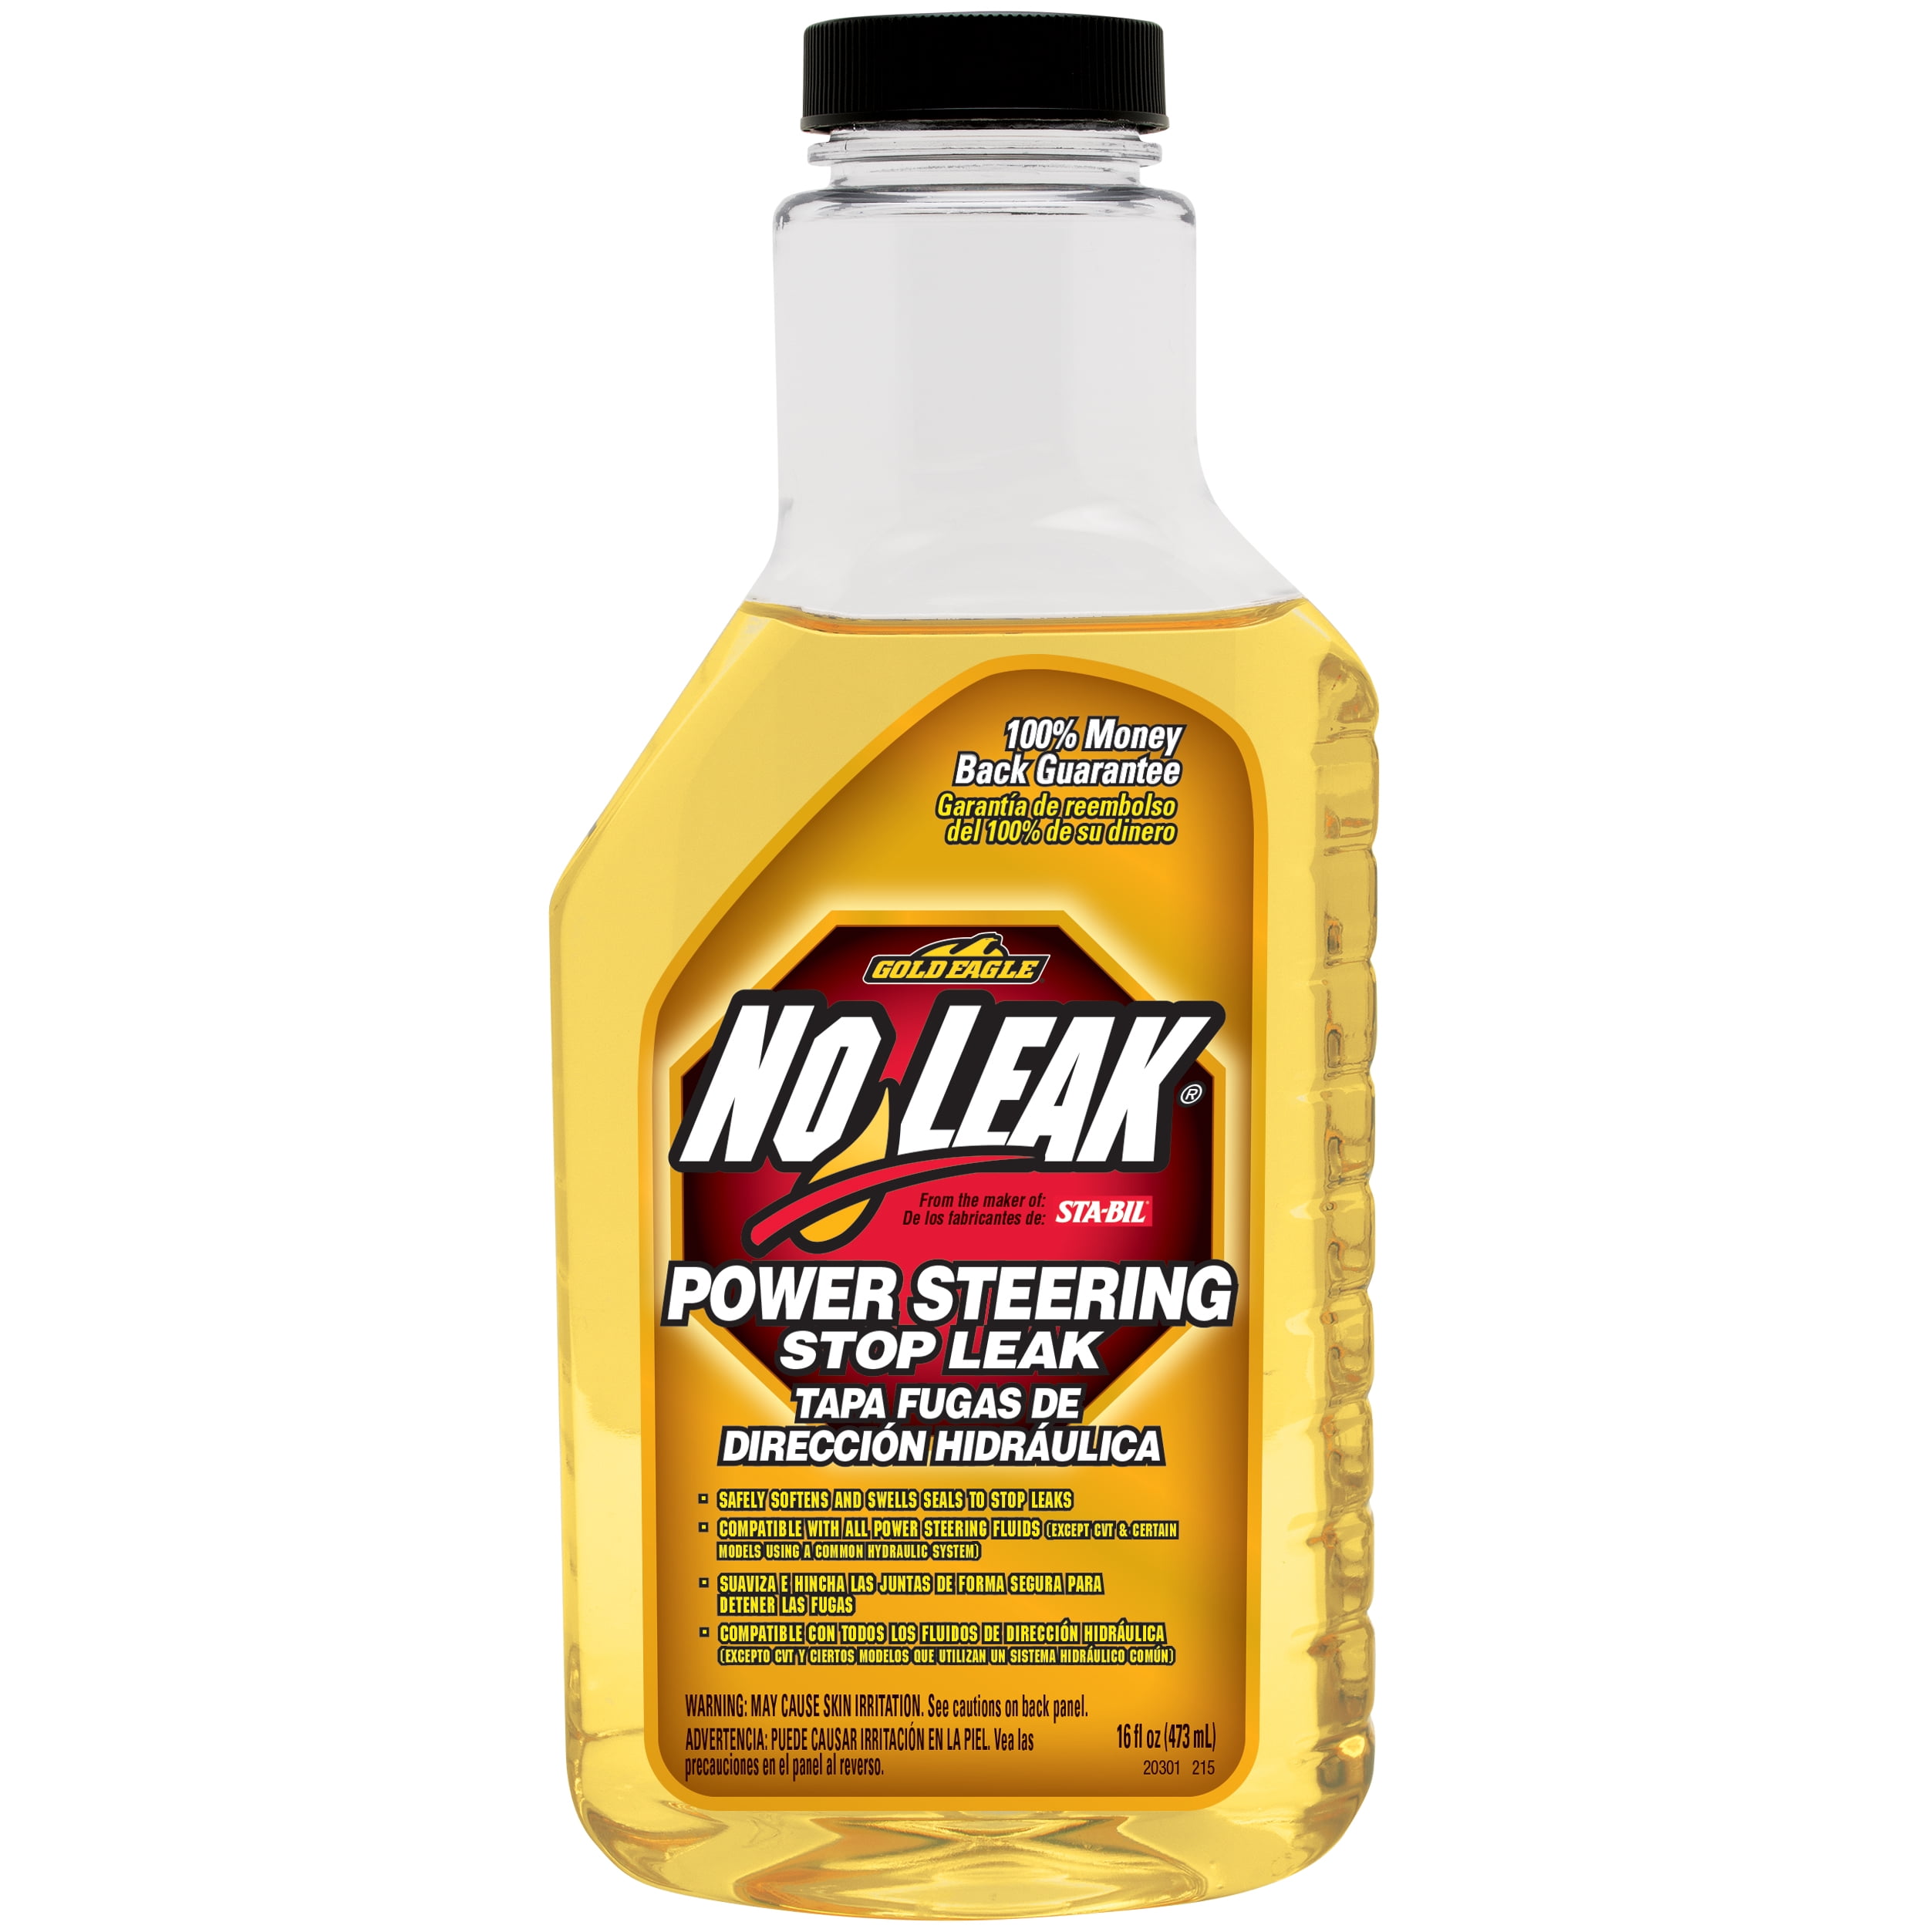 NO LEAK Power Steering Treatment, 16 oz - Works with all types of Pwr